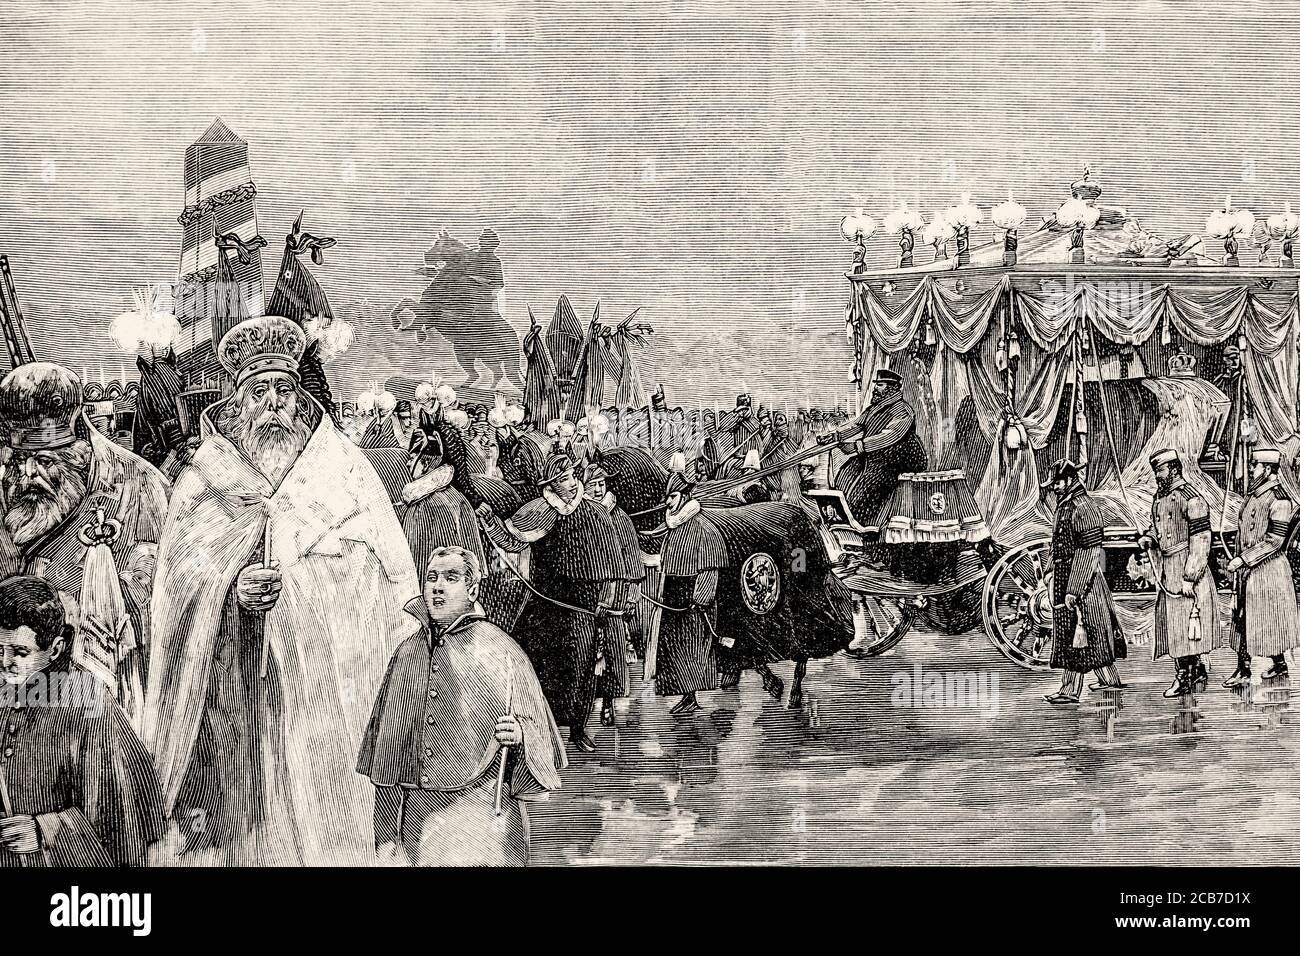 Funeral procession of Tsar Alexander III (1845-1894) Emperor of Russia, heading towards Saints Peter and Paul Cathedral, Saint Petersburg, Russia. Old XIX century engraved illustration from La Ilustracion Española y Americana 1894 Stock Photo